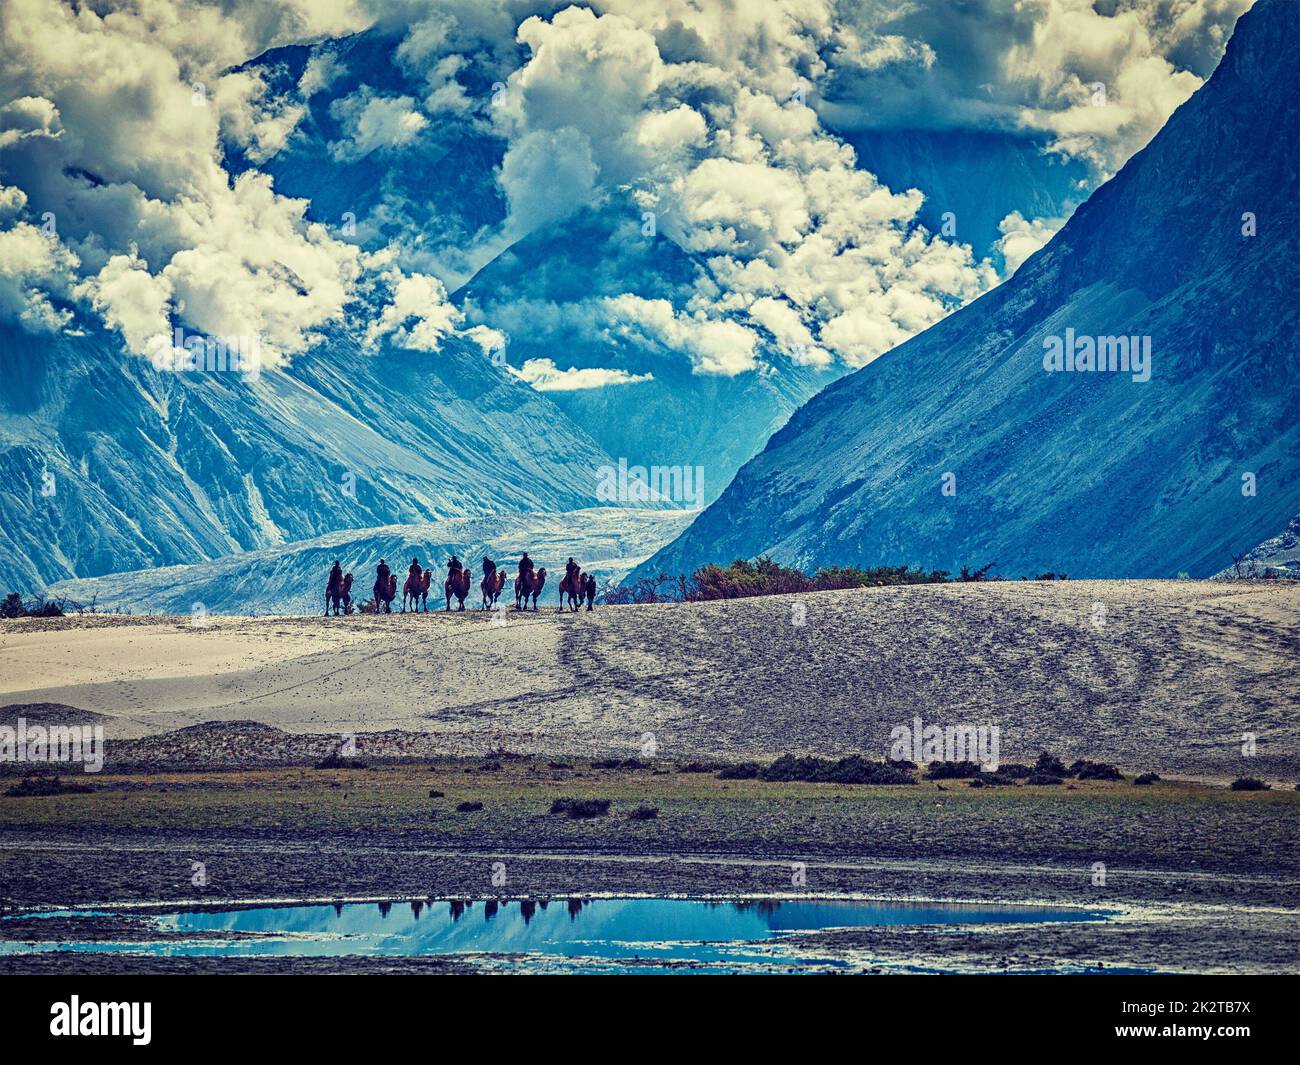 Tourists riding camels in Nubra valley in Himalayas, Ladakh Stock Photo